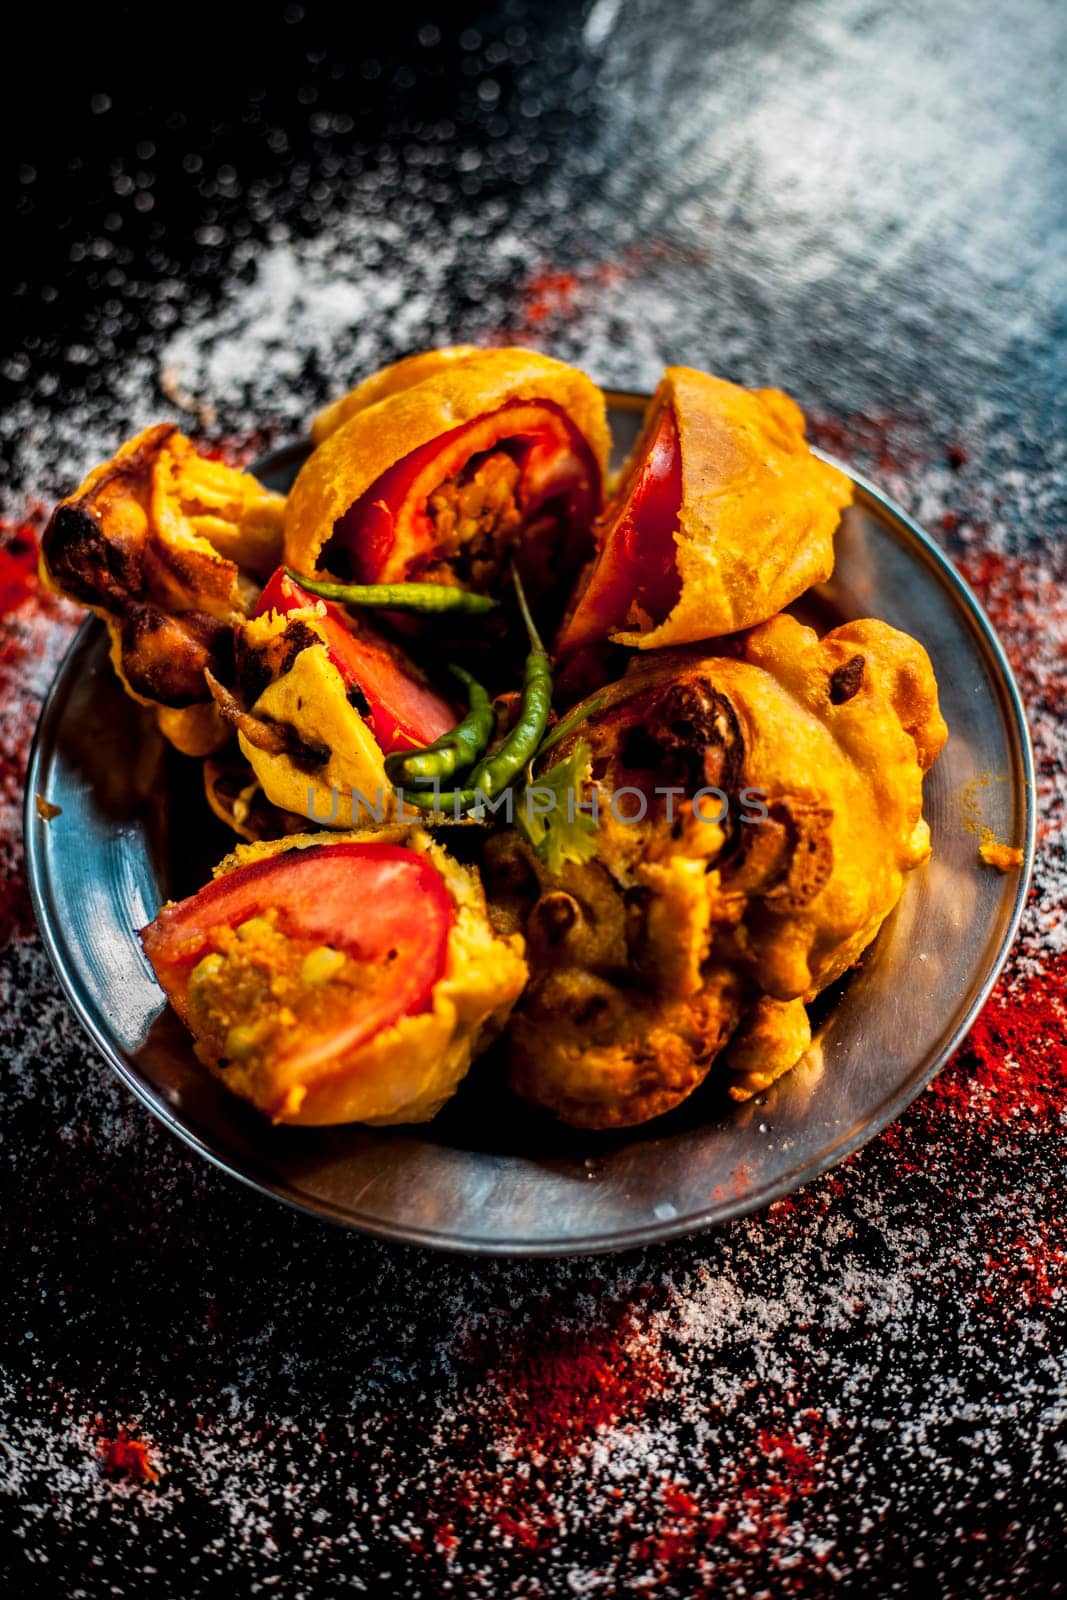 Shot of Indian tomato fritter on a glass plate along with some species on a black table. Shot of tomato pakora or tomato pakoda on a glass plate.